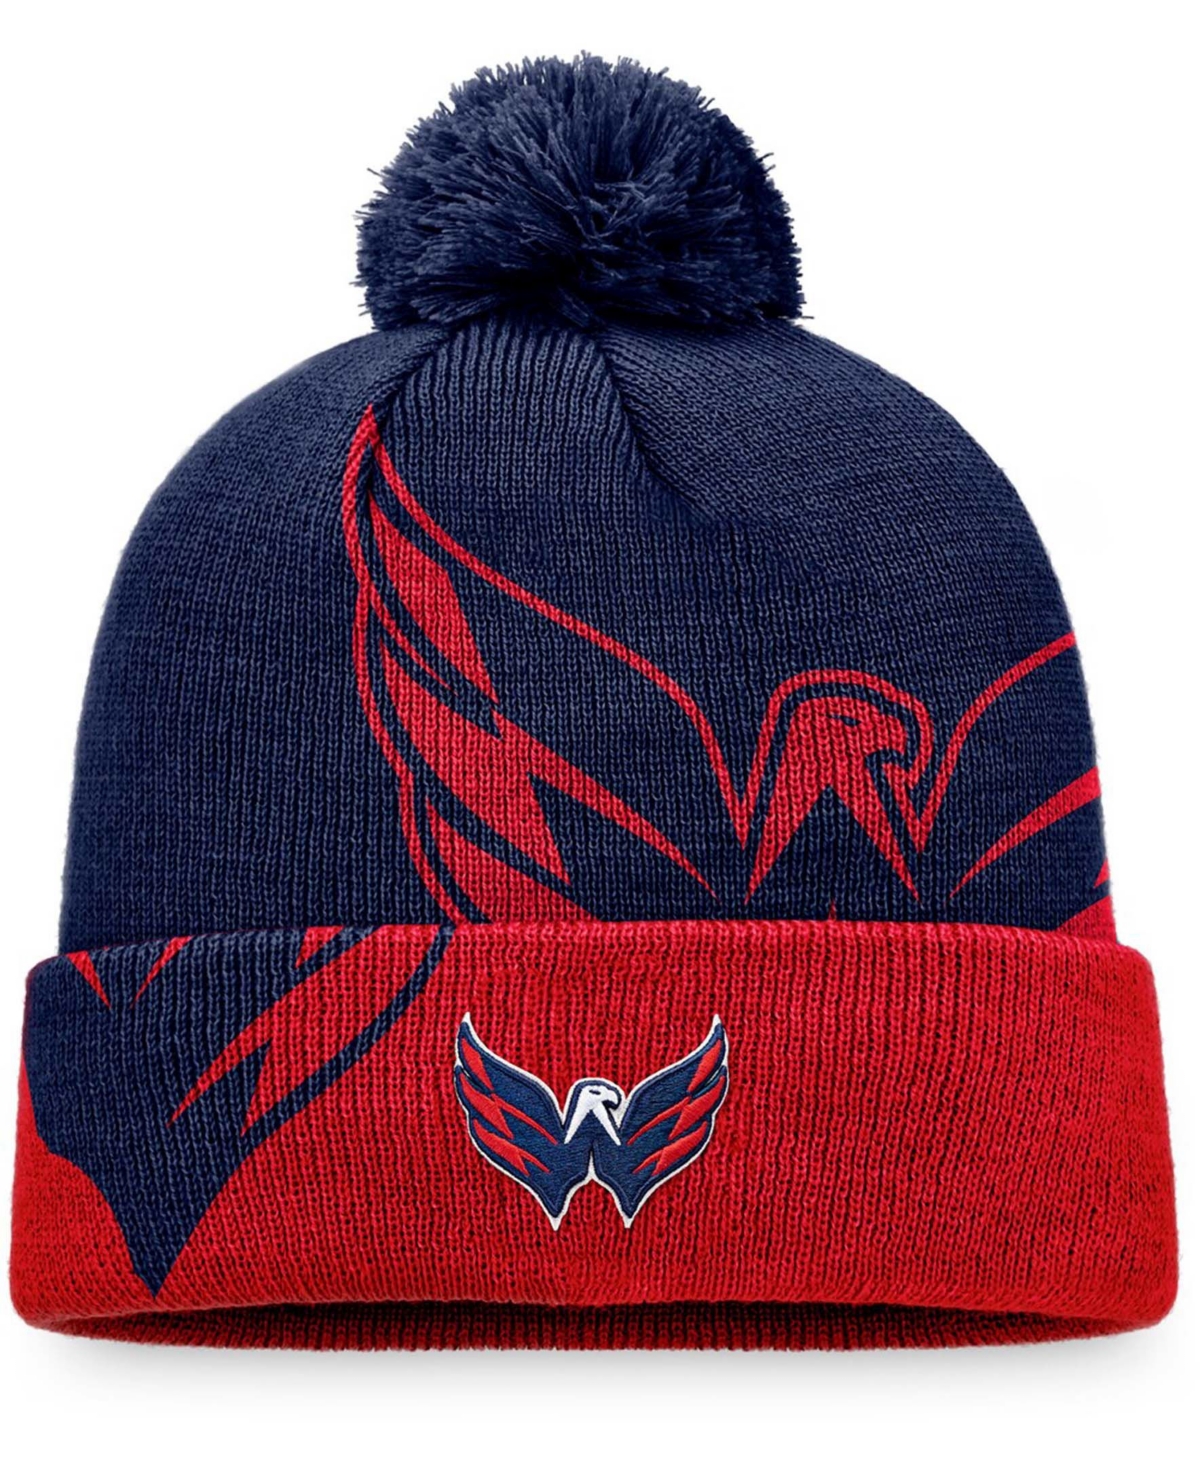 Shop Fanatics Men's Navy, Red Washington Capitals Block Party Cuffed Knit Hat With Pom In Navy,red